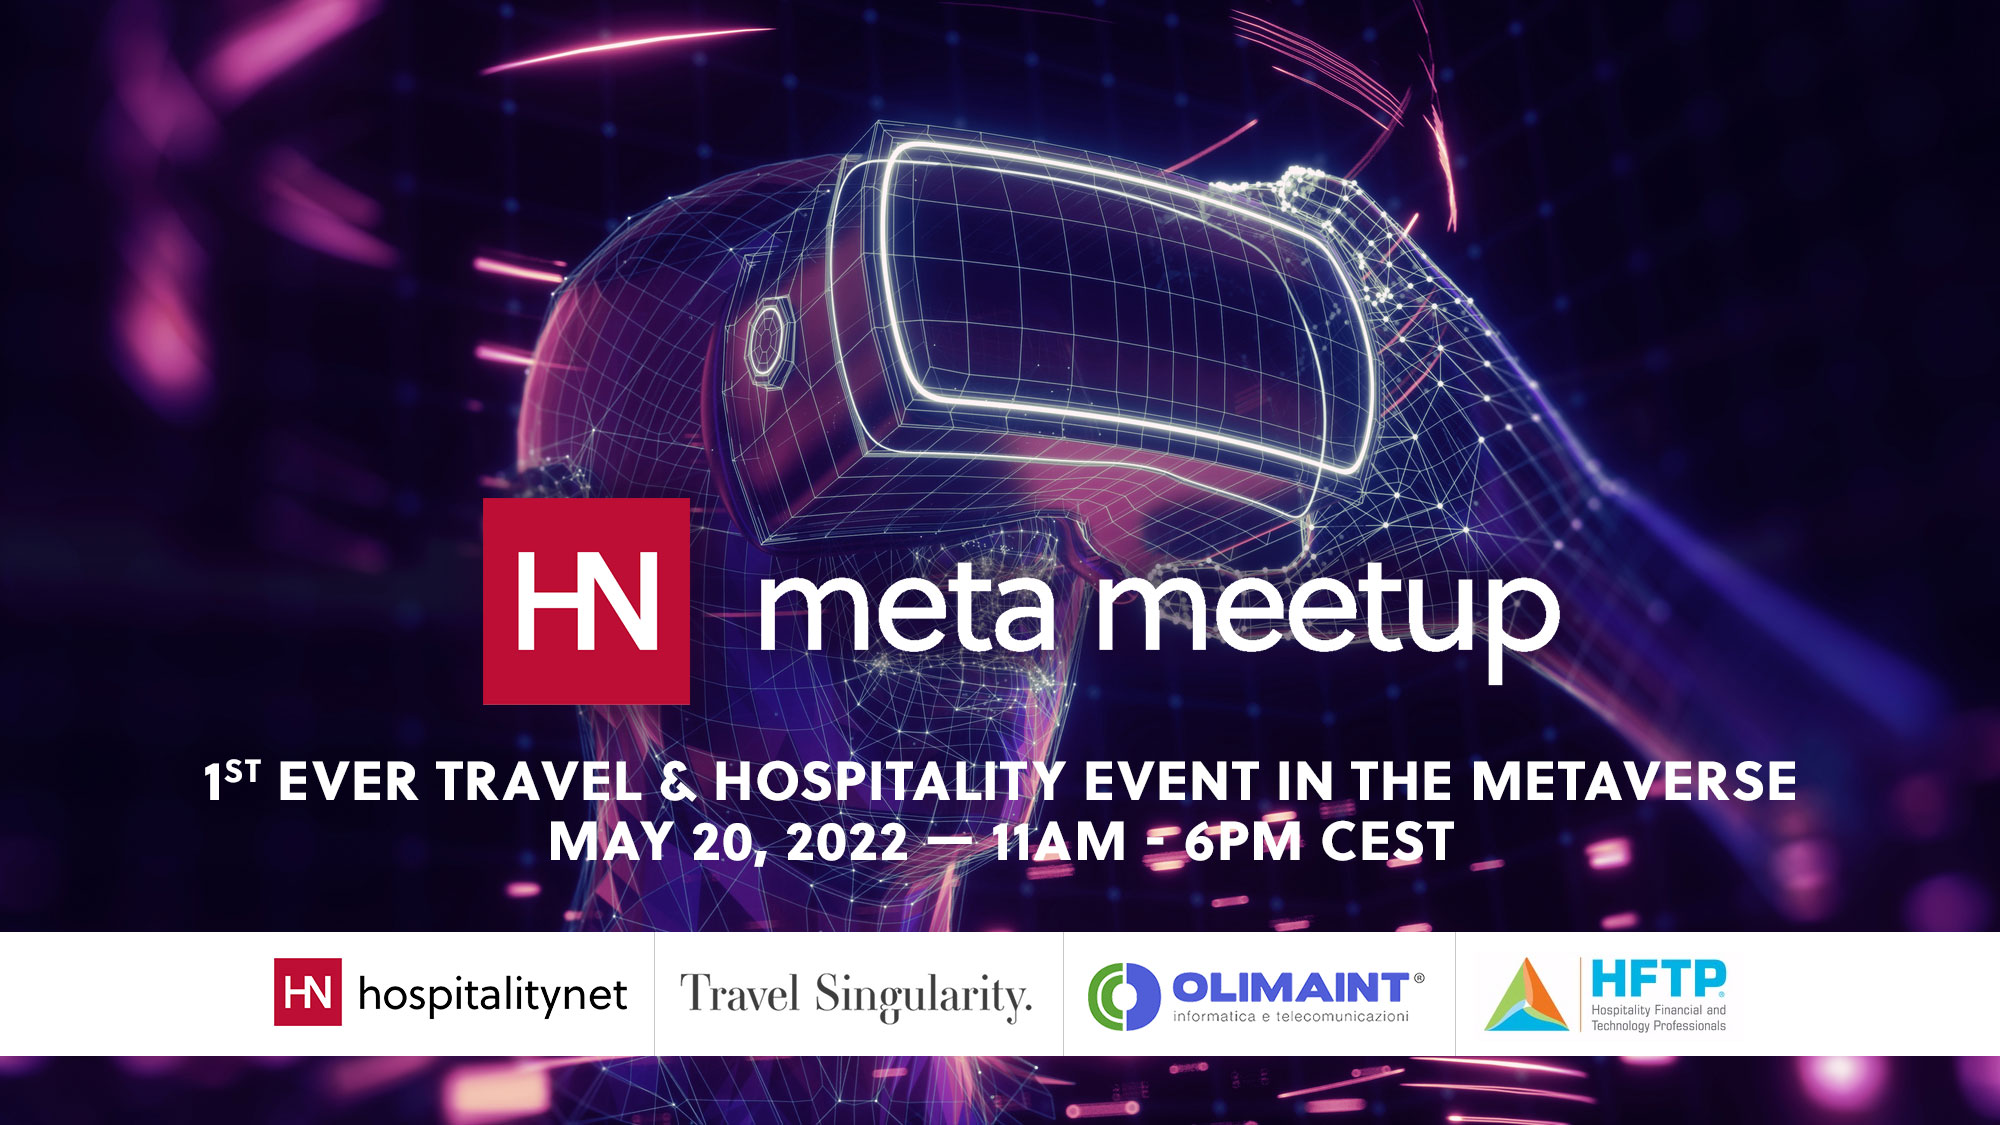 Travel Event in the Metaverse